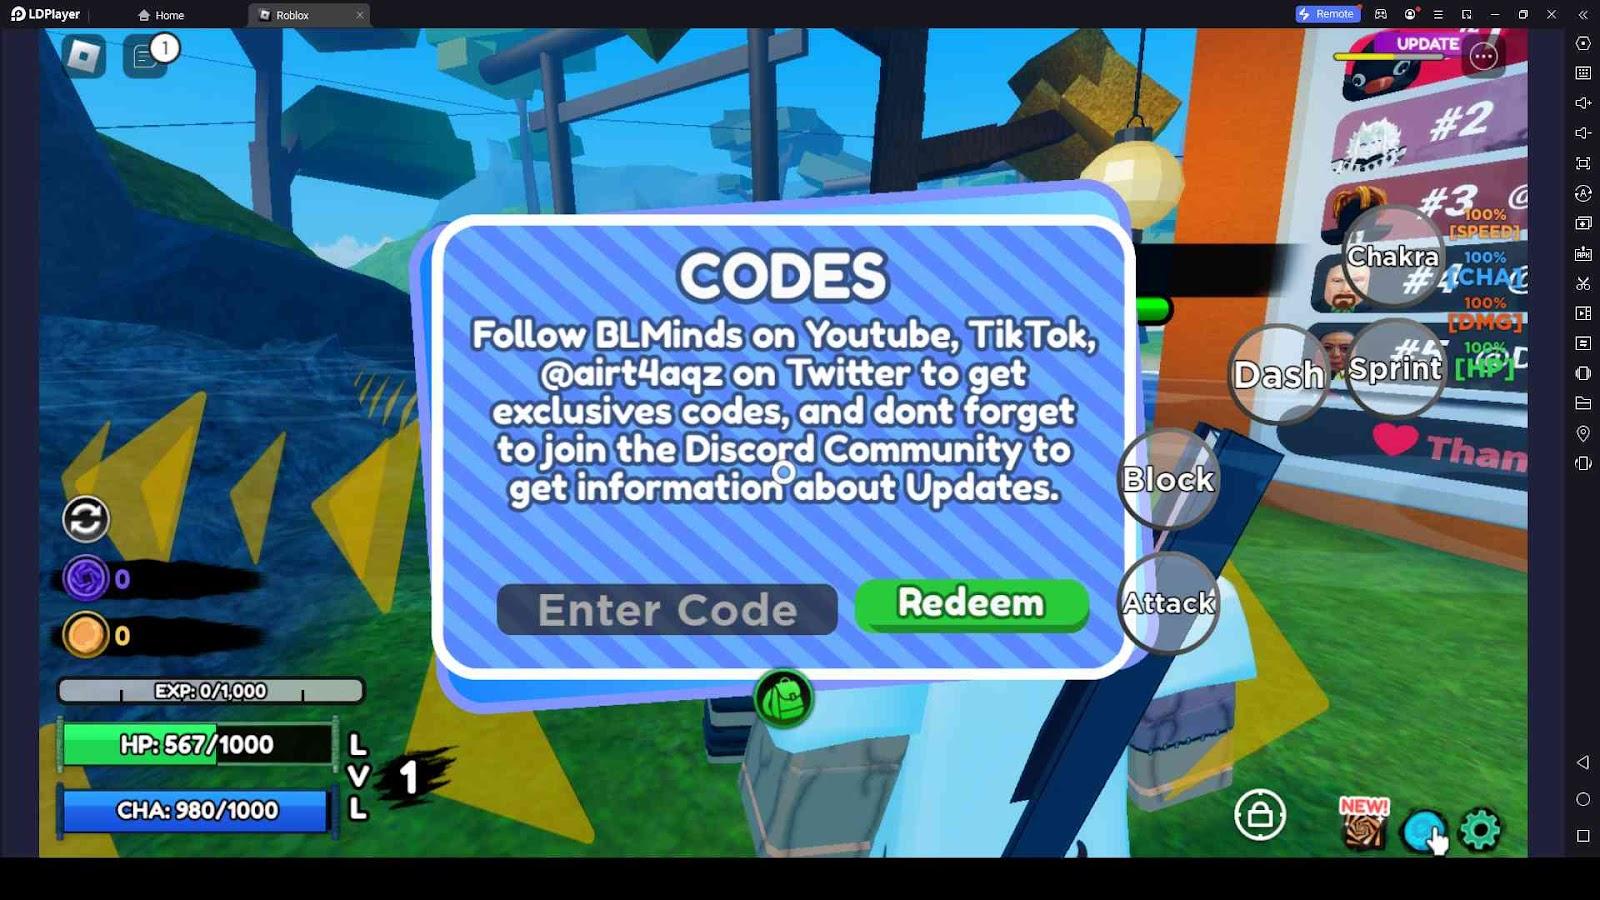 In the Roblox game, the Kage Tycoon Codes are updated